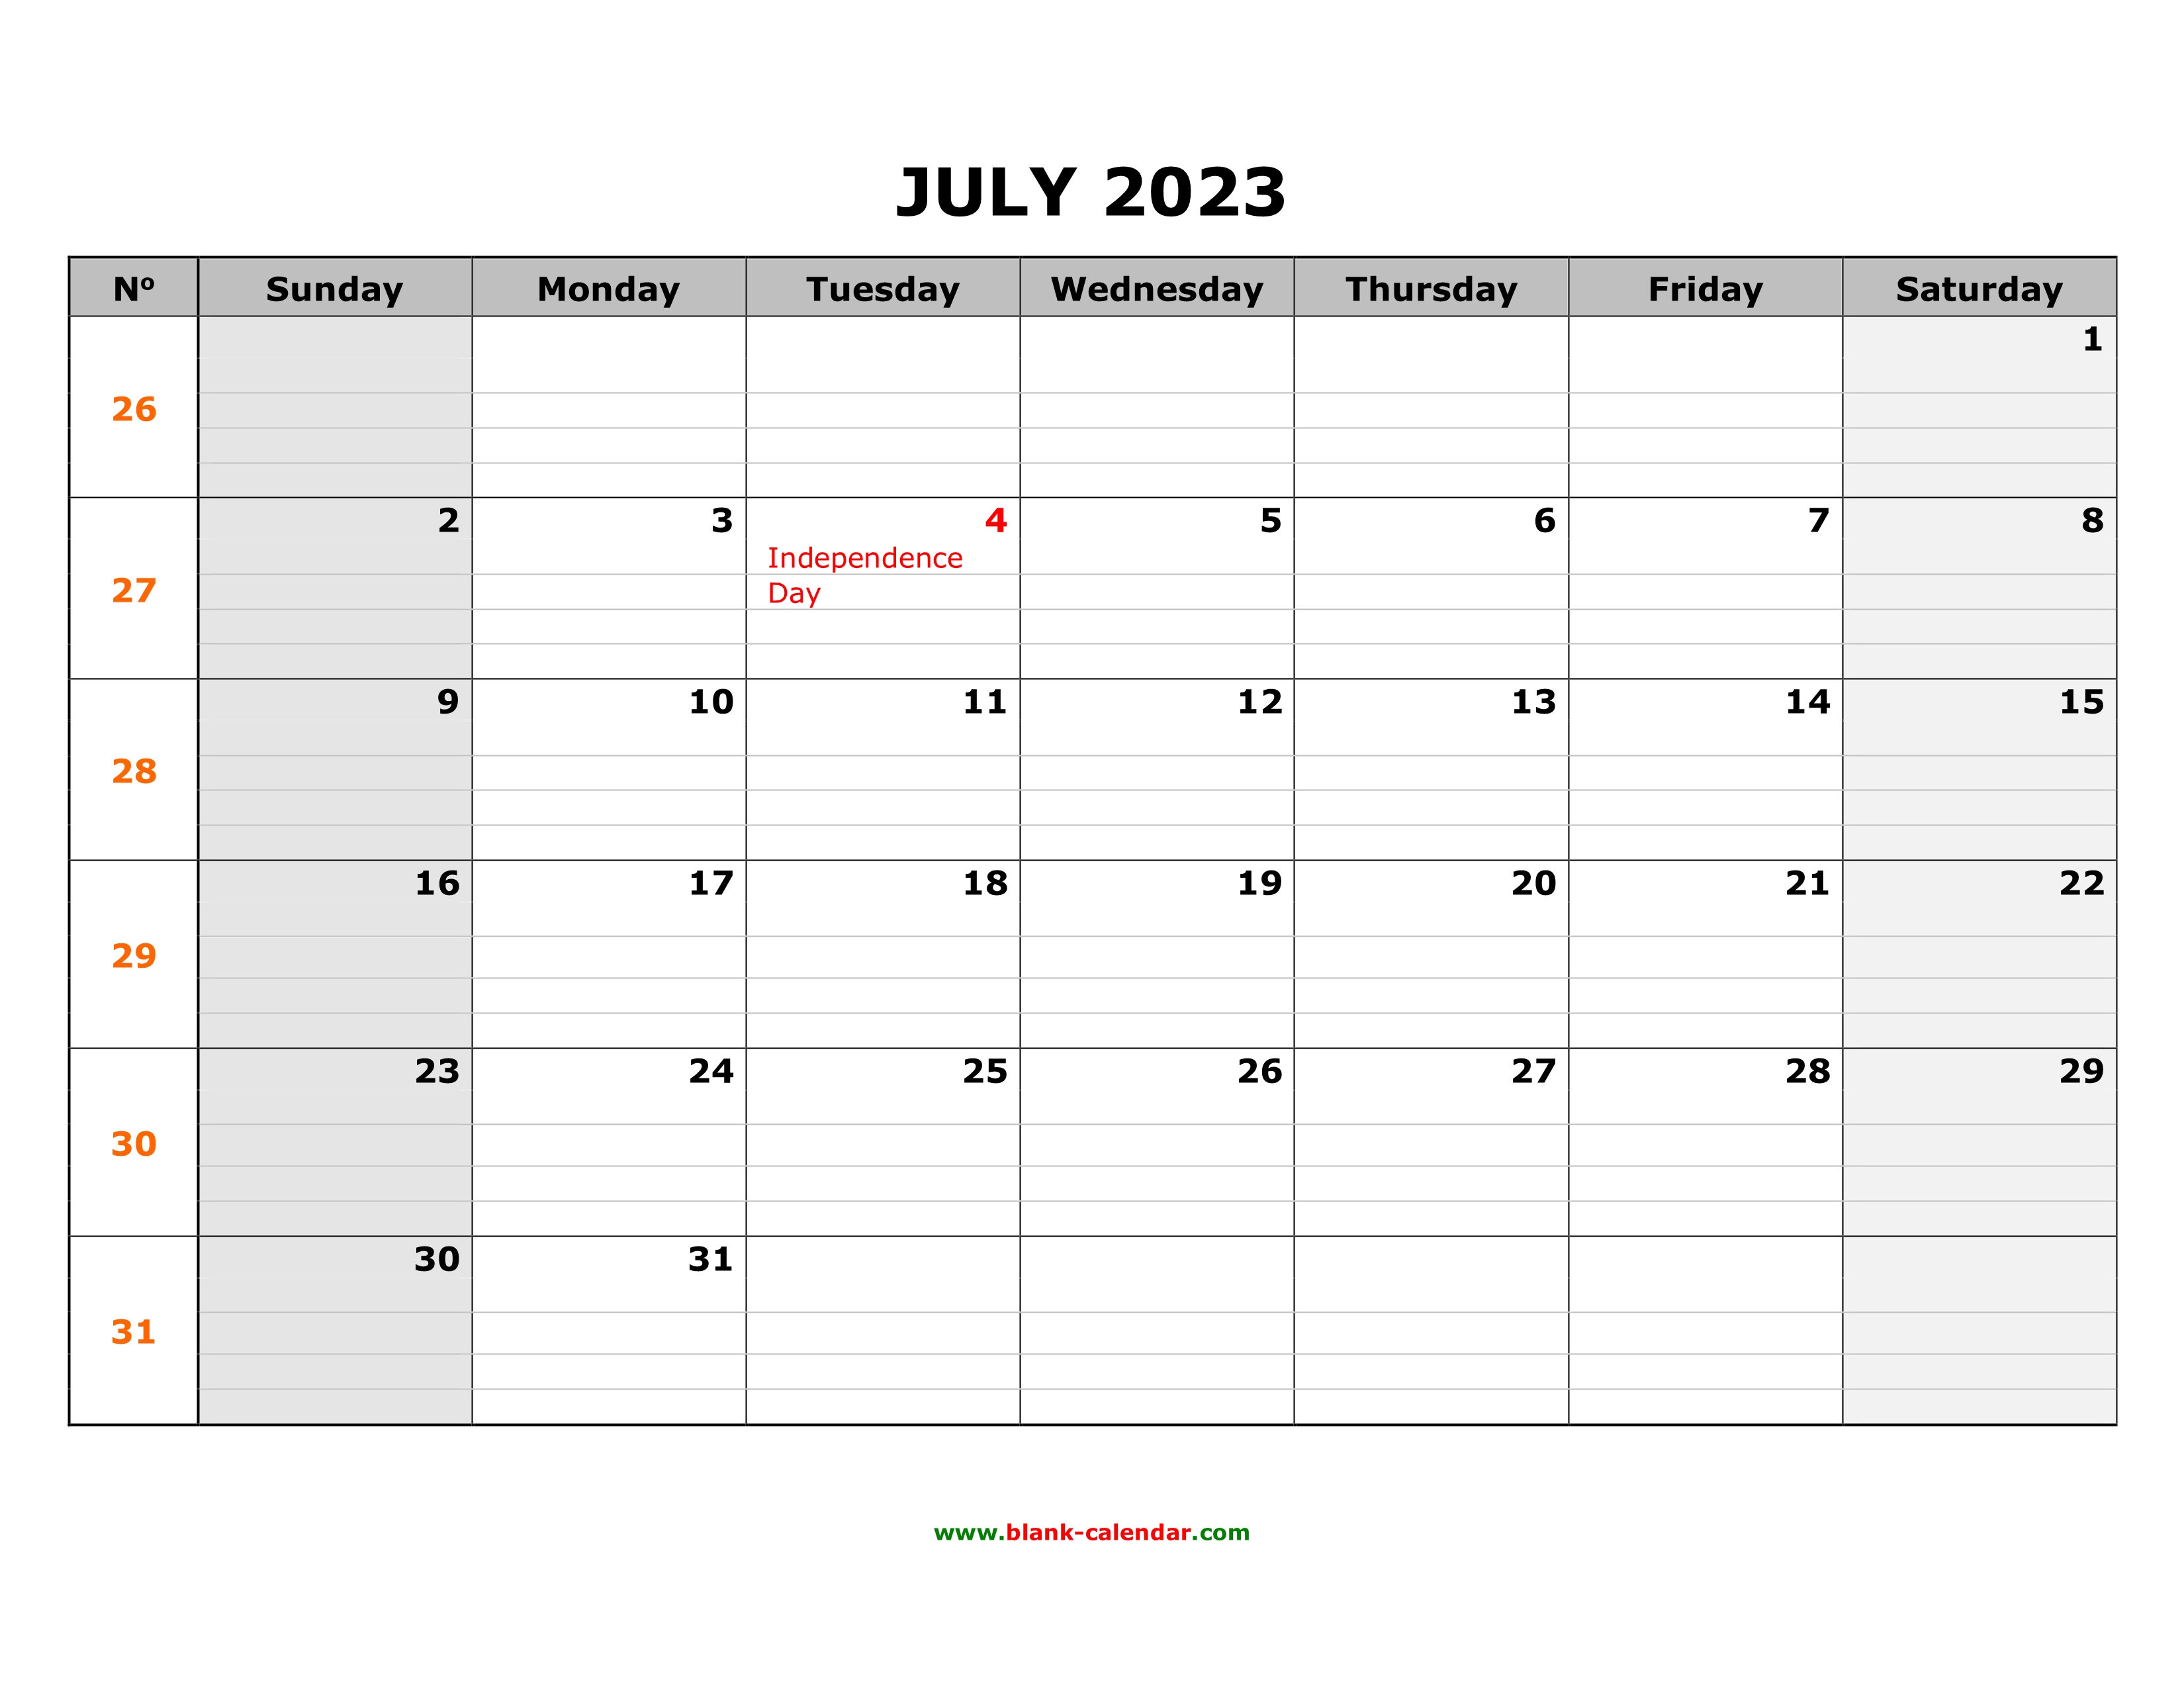 Free Download Printable July 2023 Calendar, large box grid, space for notes